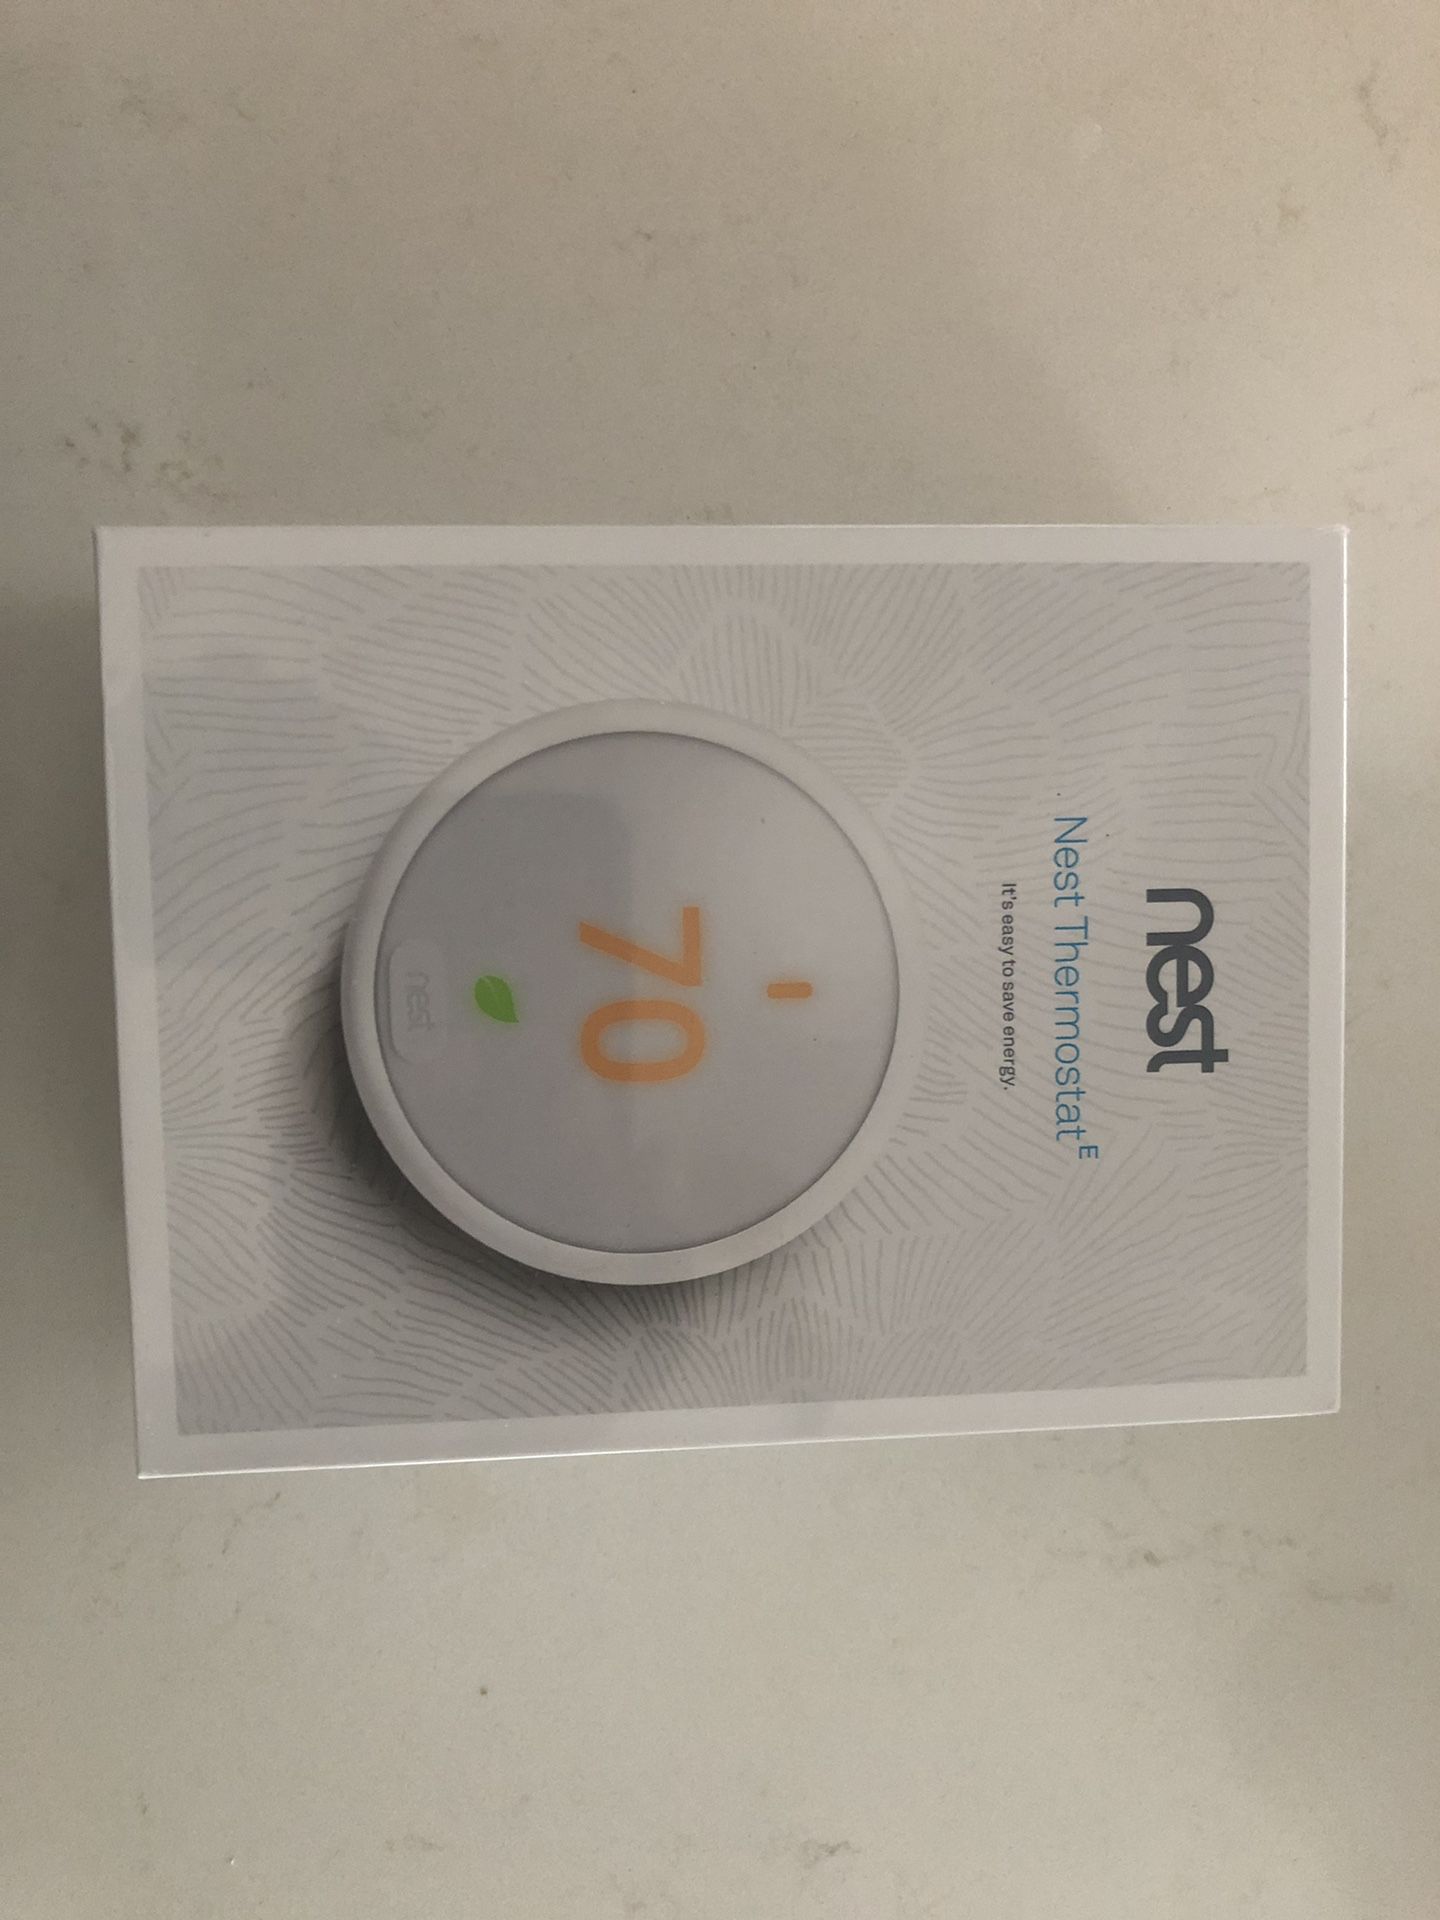 (Brand New) Nest Thermostat E, Great Deal!